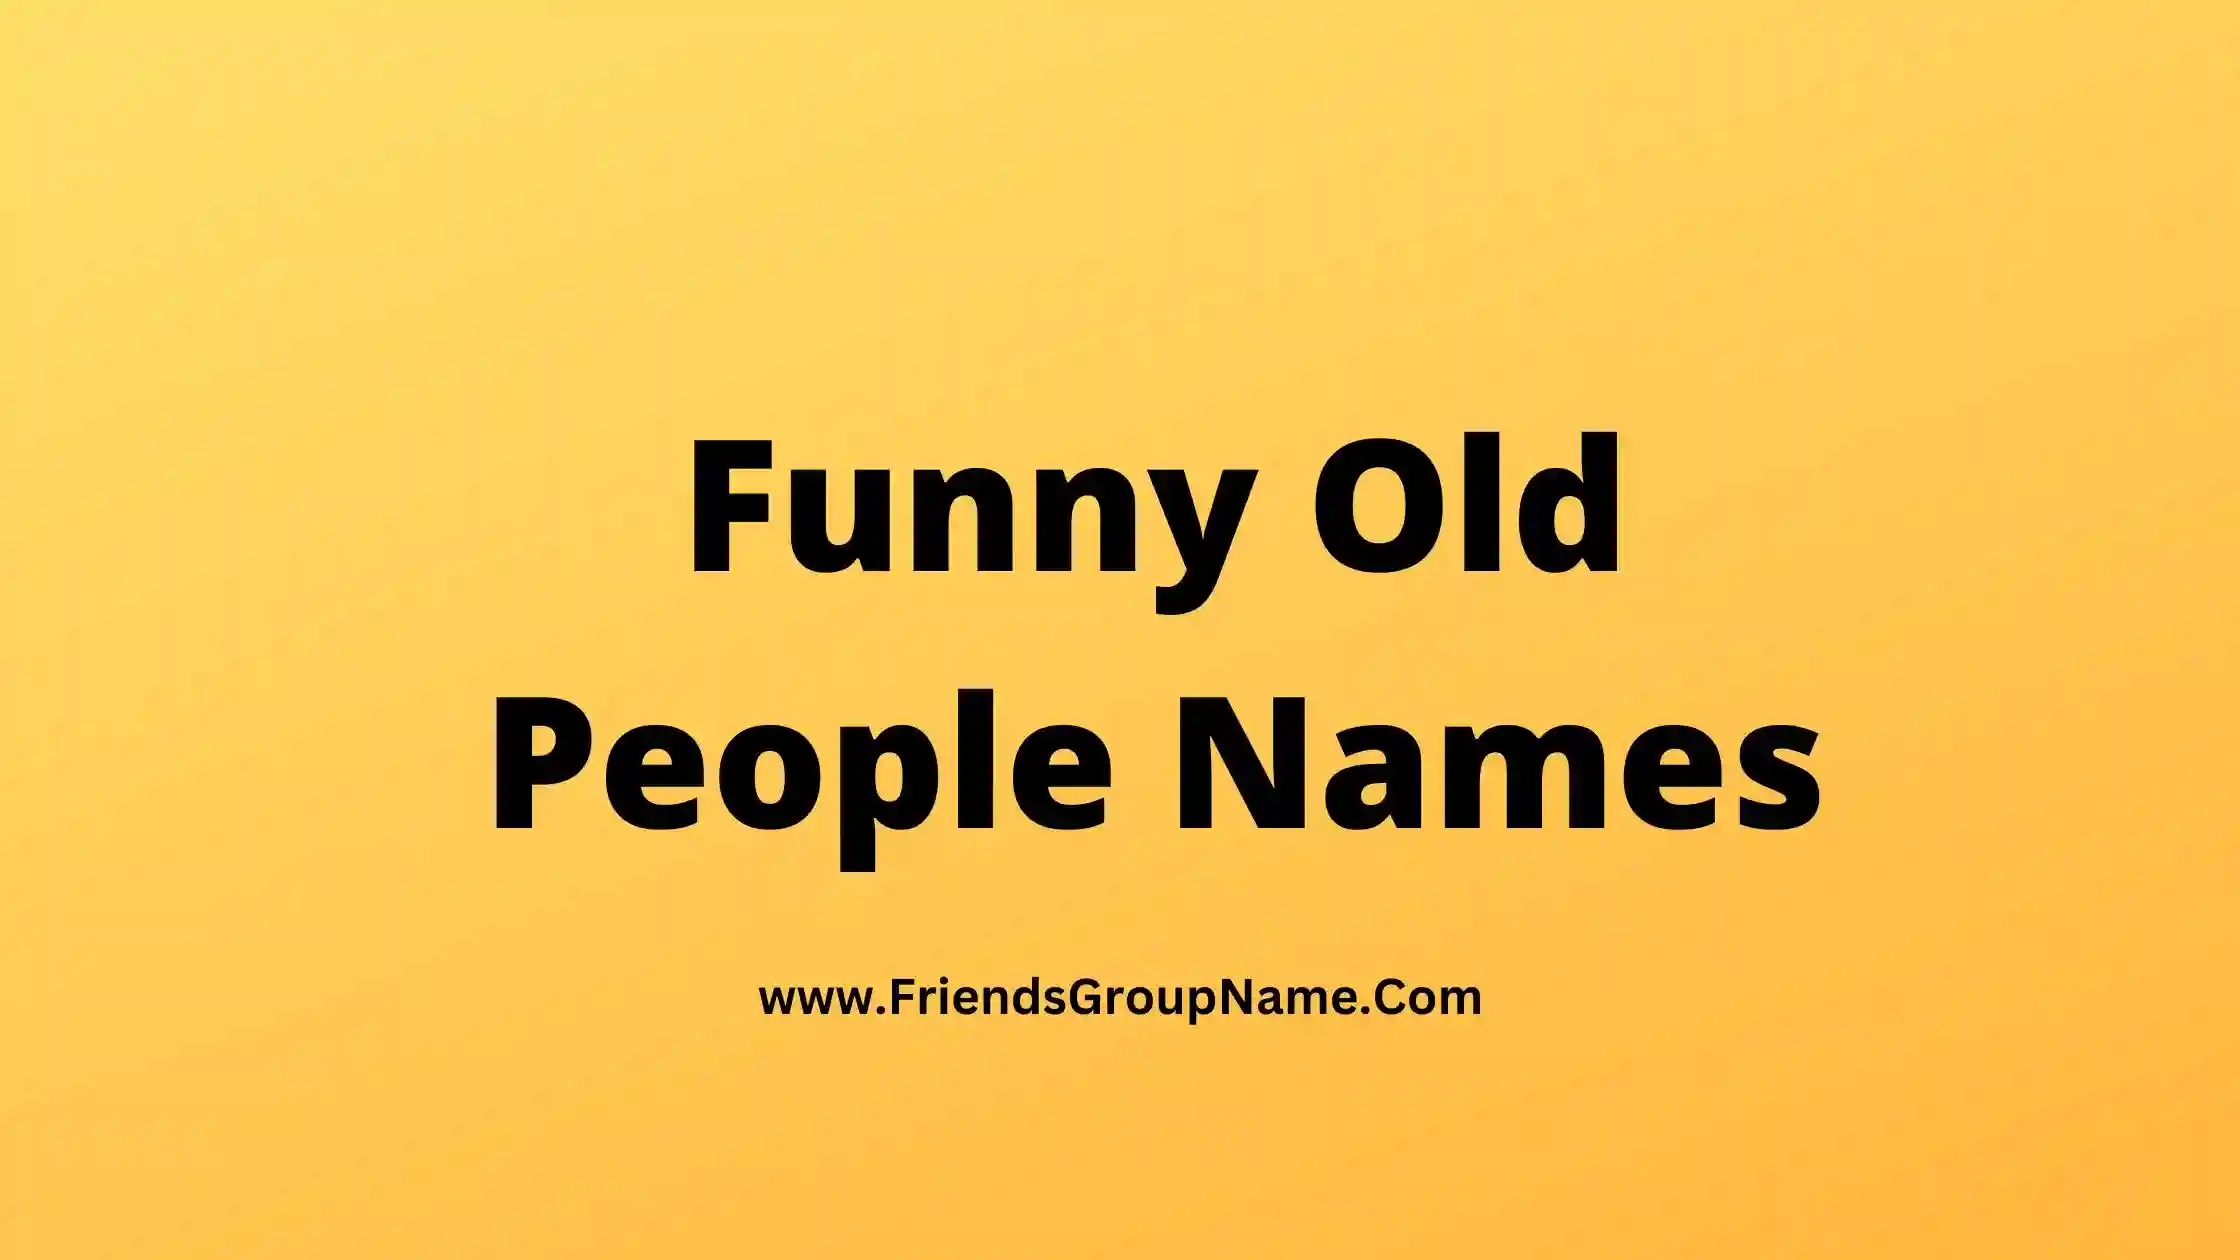 Funny Old People Names